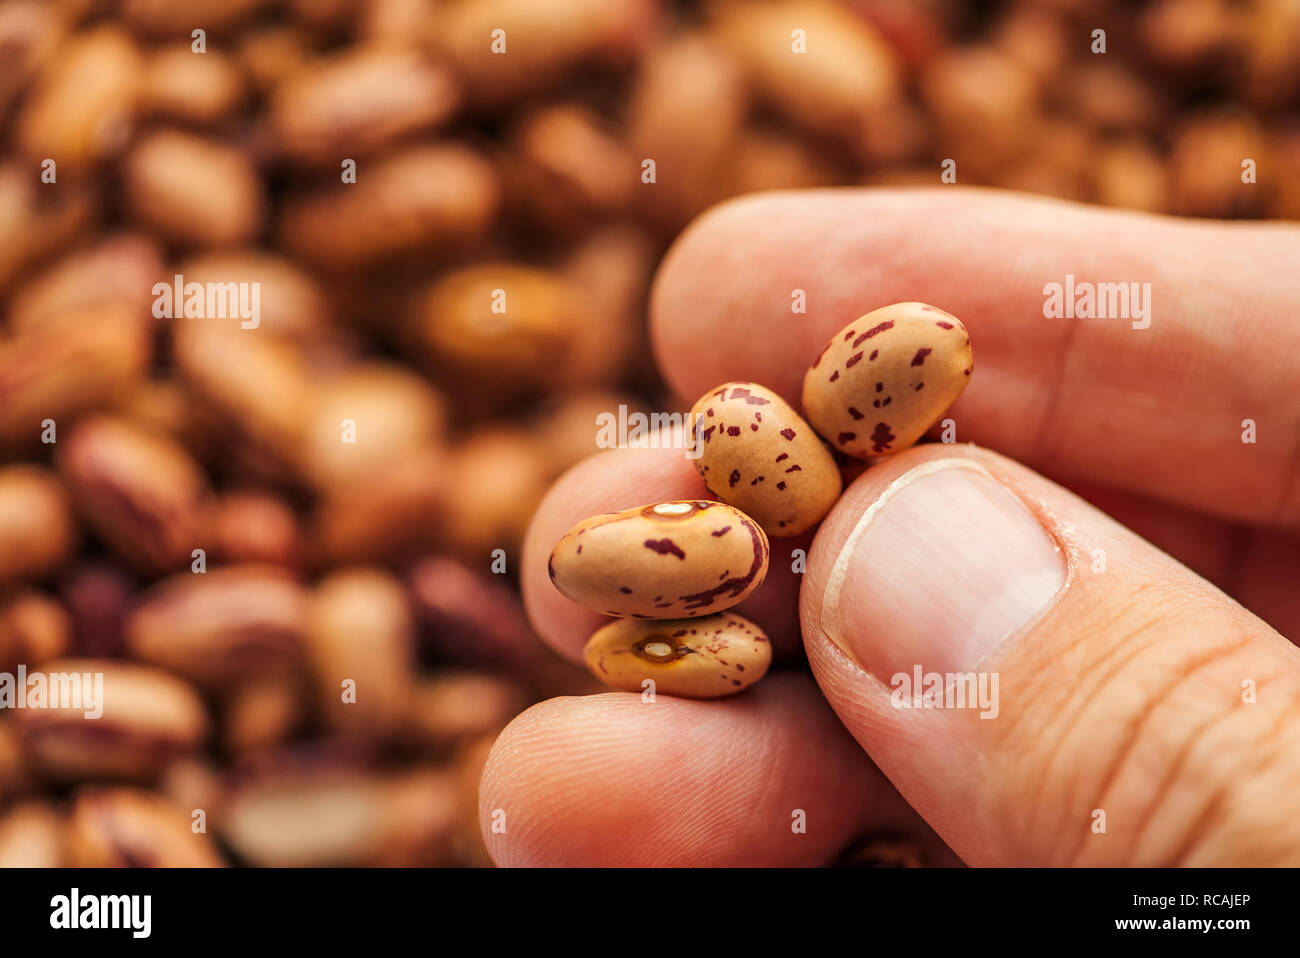 Close up of hand holding pinto bean between fingers, selective focus Stock Photo